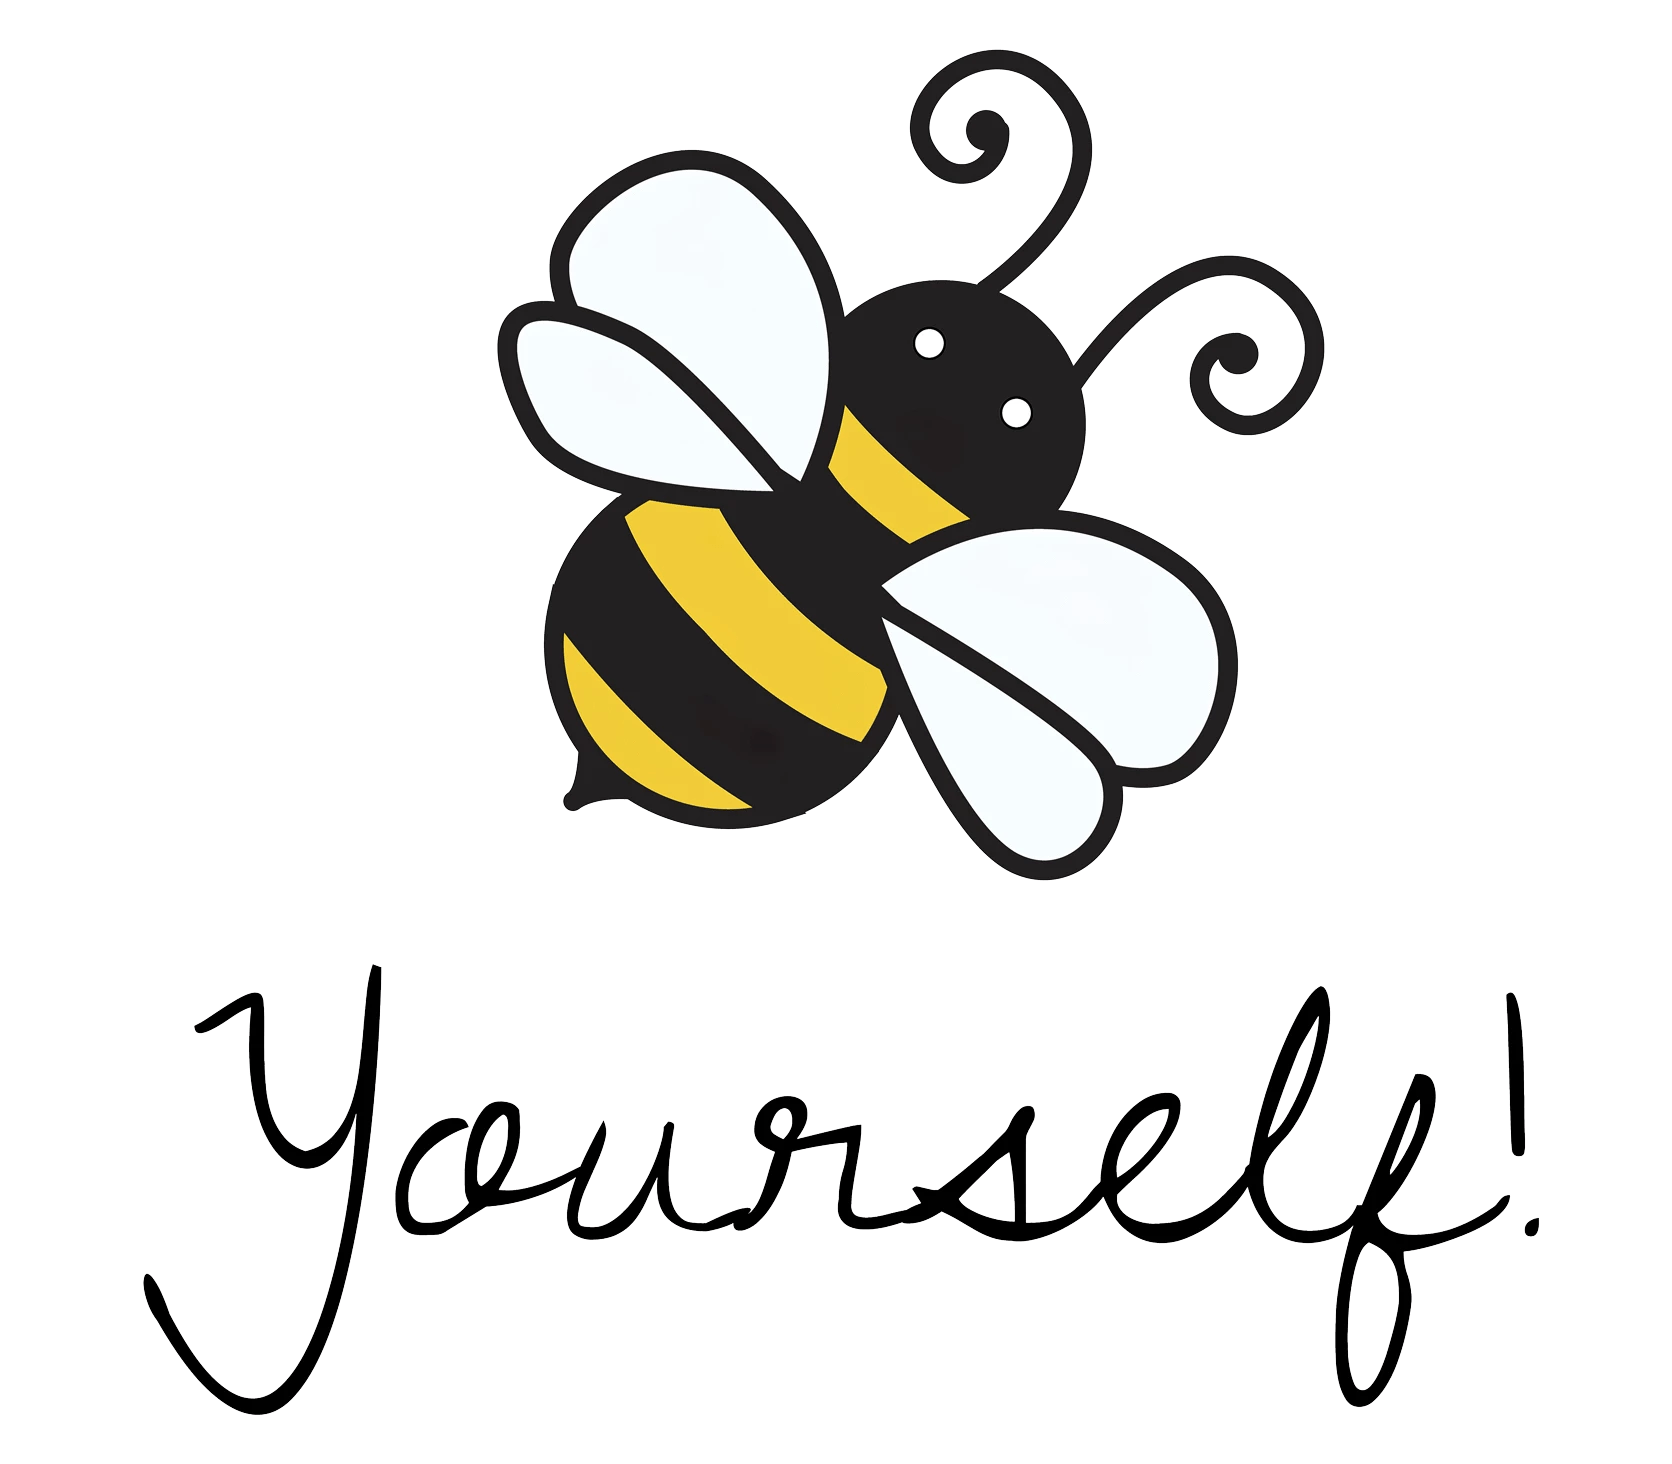 Bee Yourself - That Bee Place